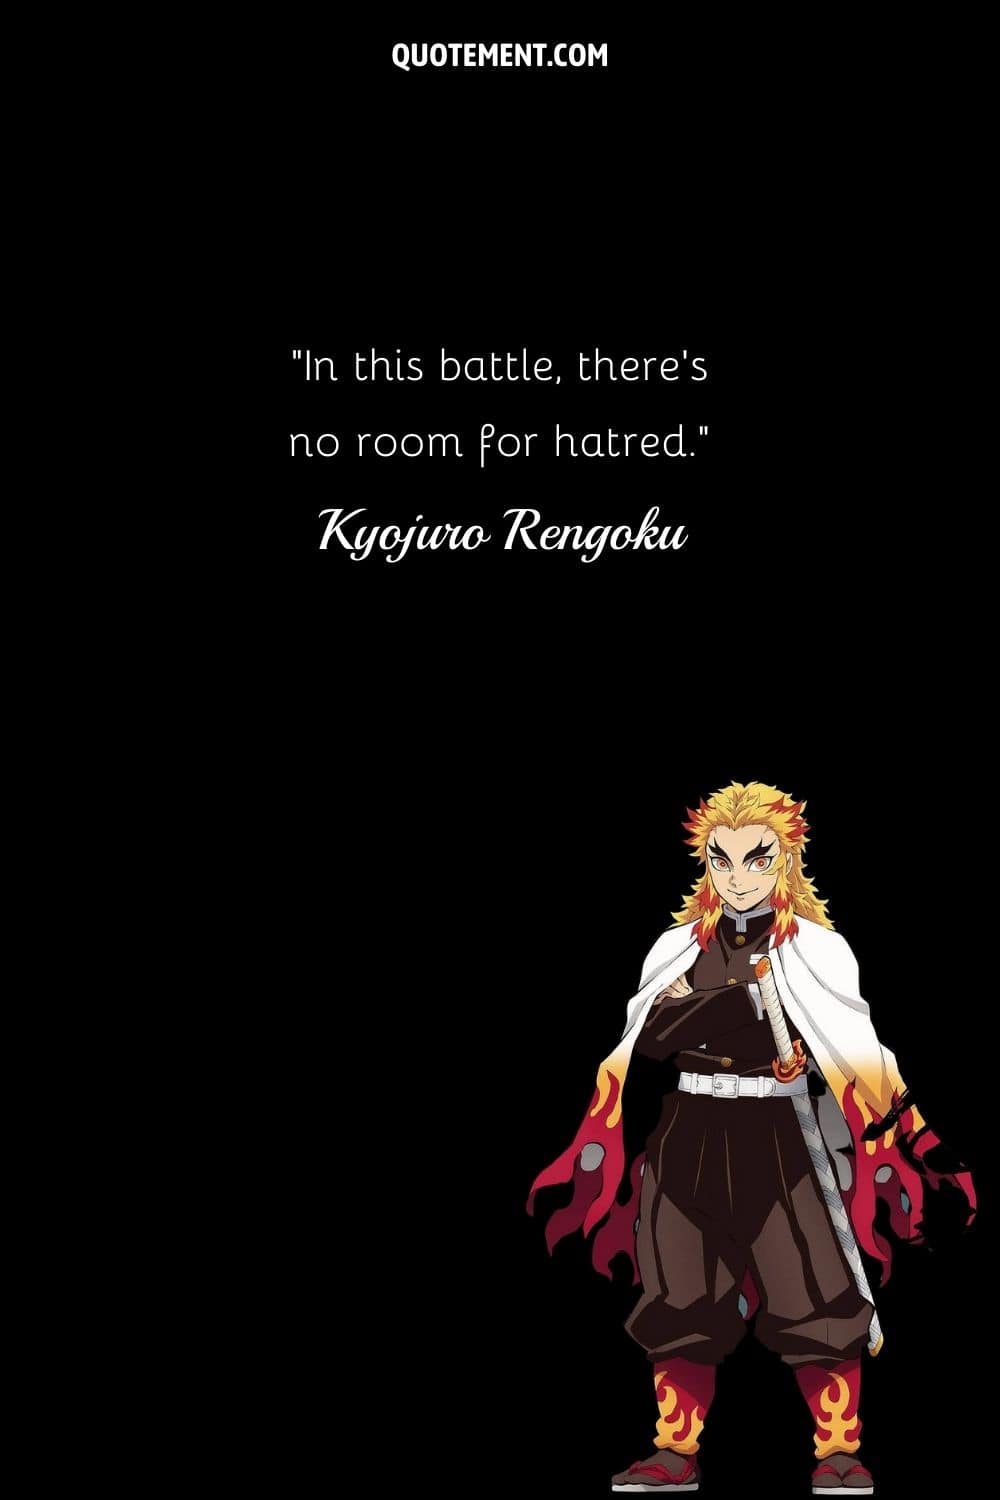 18 Most Powerful Quotes By Kyojuro Rengoku From Demon Slayer